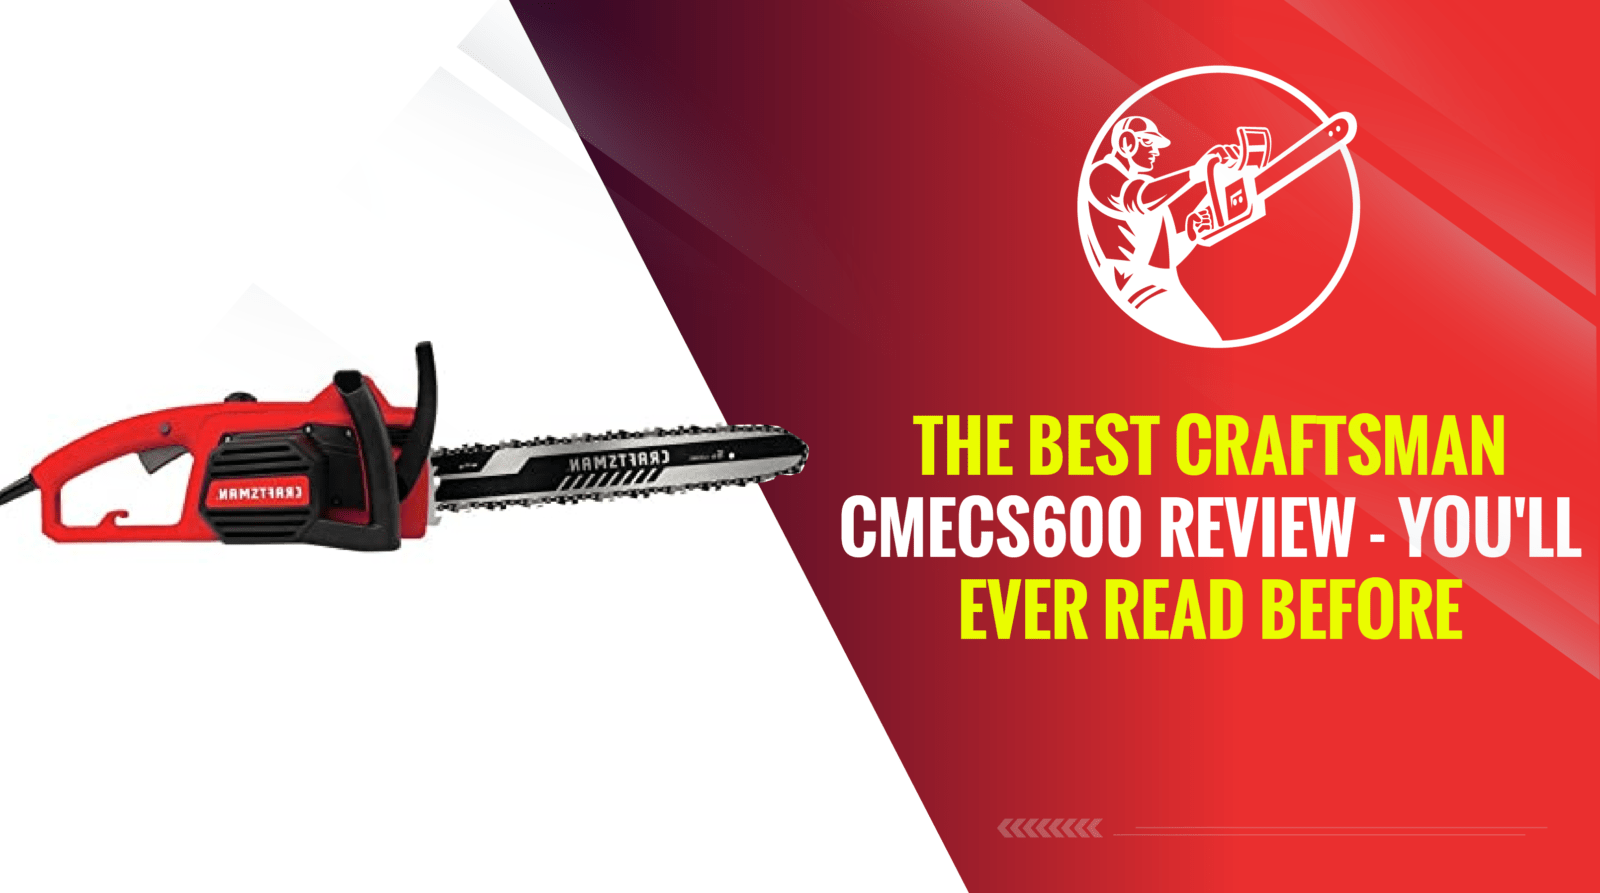 The Best Craftsman CMECS600 Review - You'll Ever Read Before